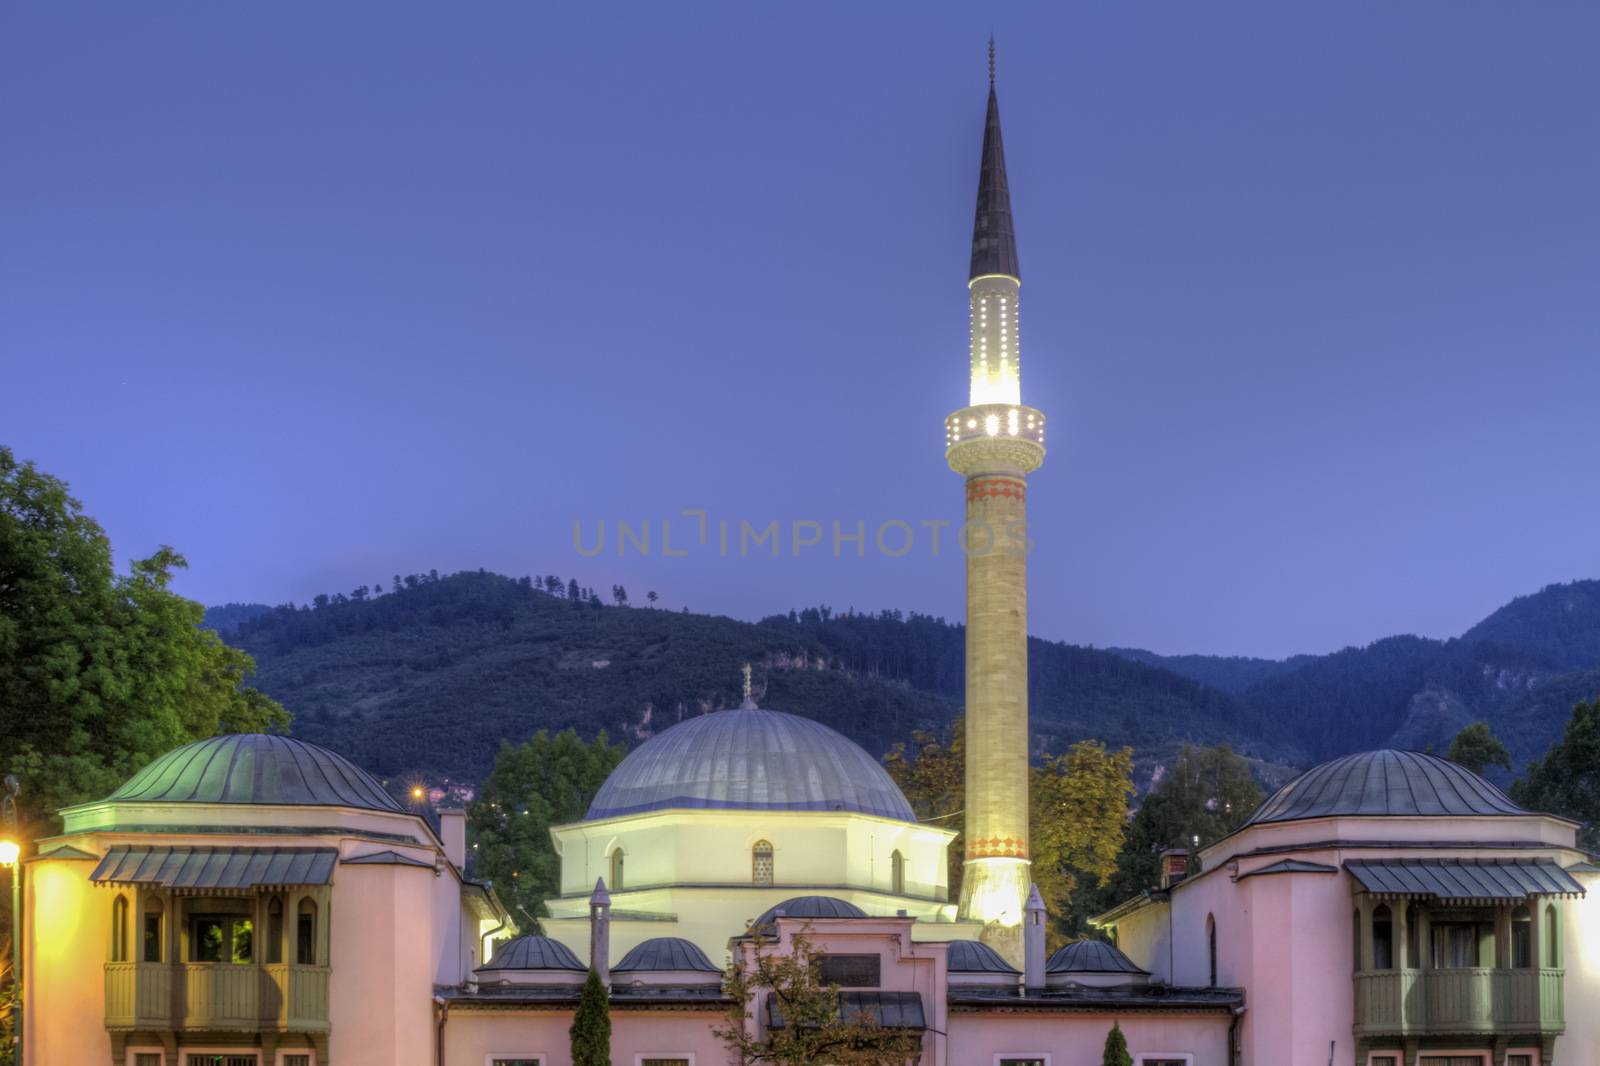 Emperor's Mosque in Sarajevo on the banks of the Milyacka River, Bosnia and Herzegovina by Elenaphotos21